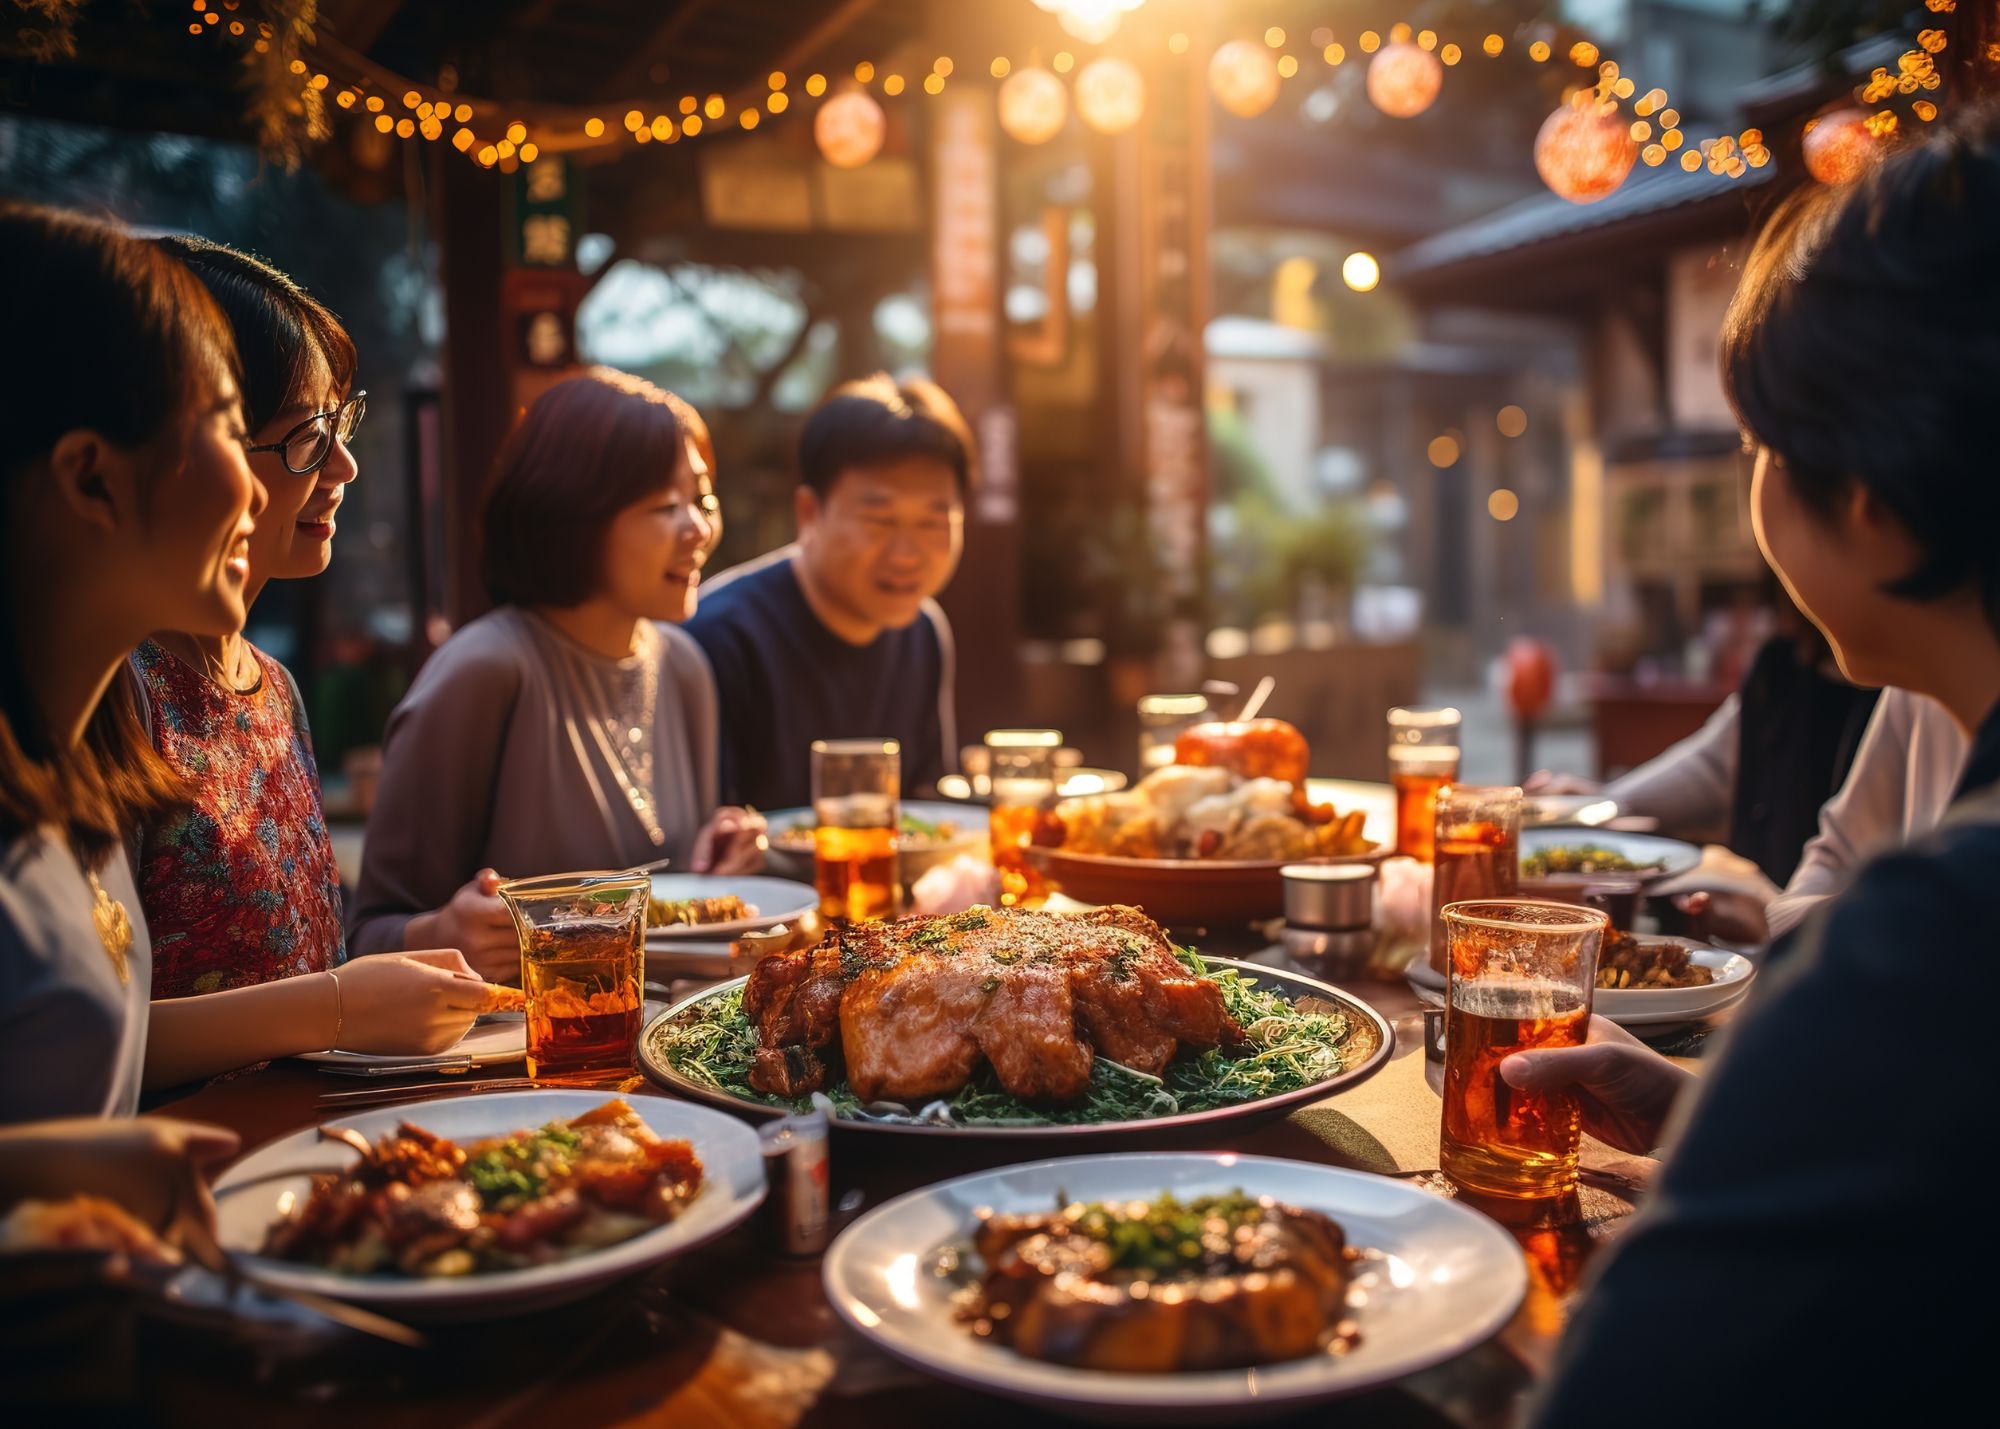 An image of an Asian family sitting around a table enjoying dinner together for Lunar New Year.